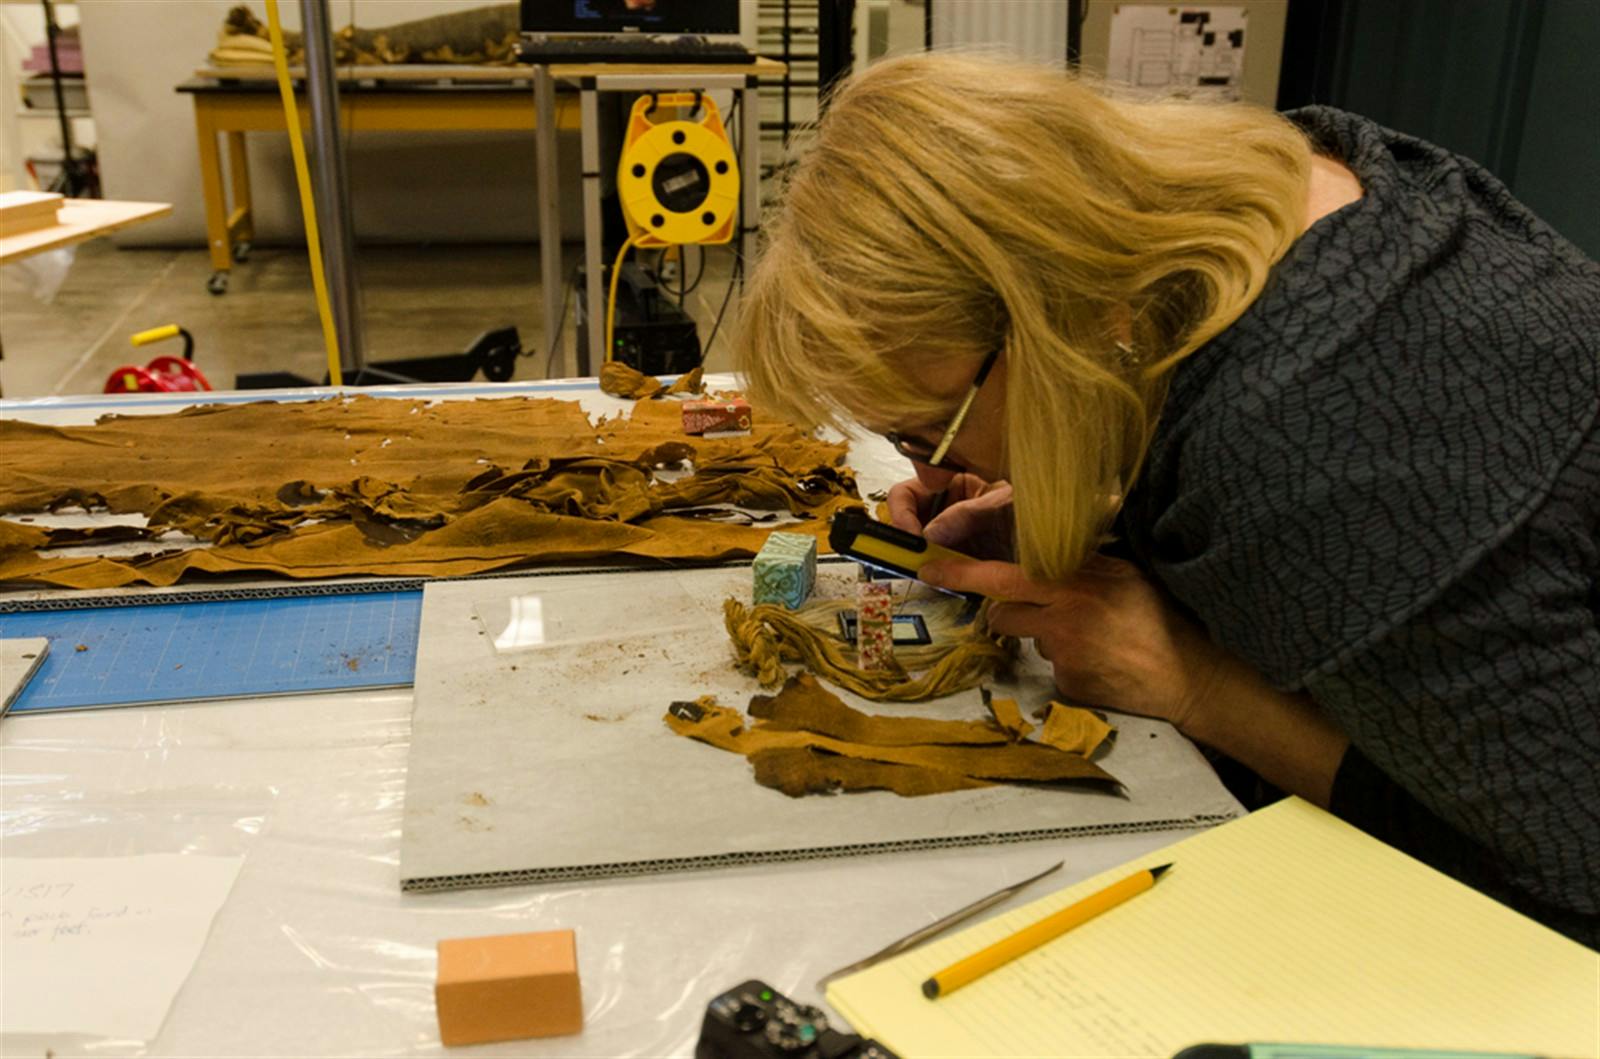 Conservator Mimi Leveque examines and documents the condition of the shroud. Photo credit – JP Brown.